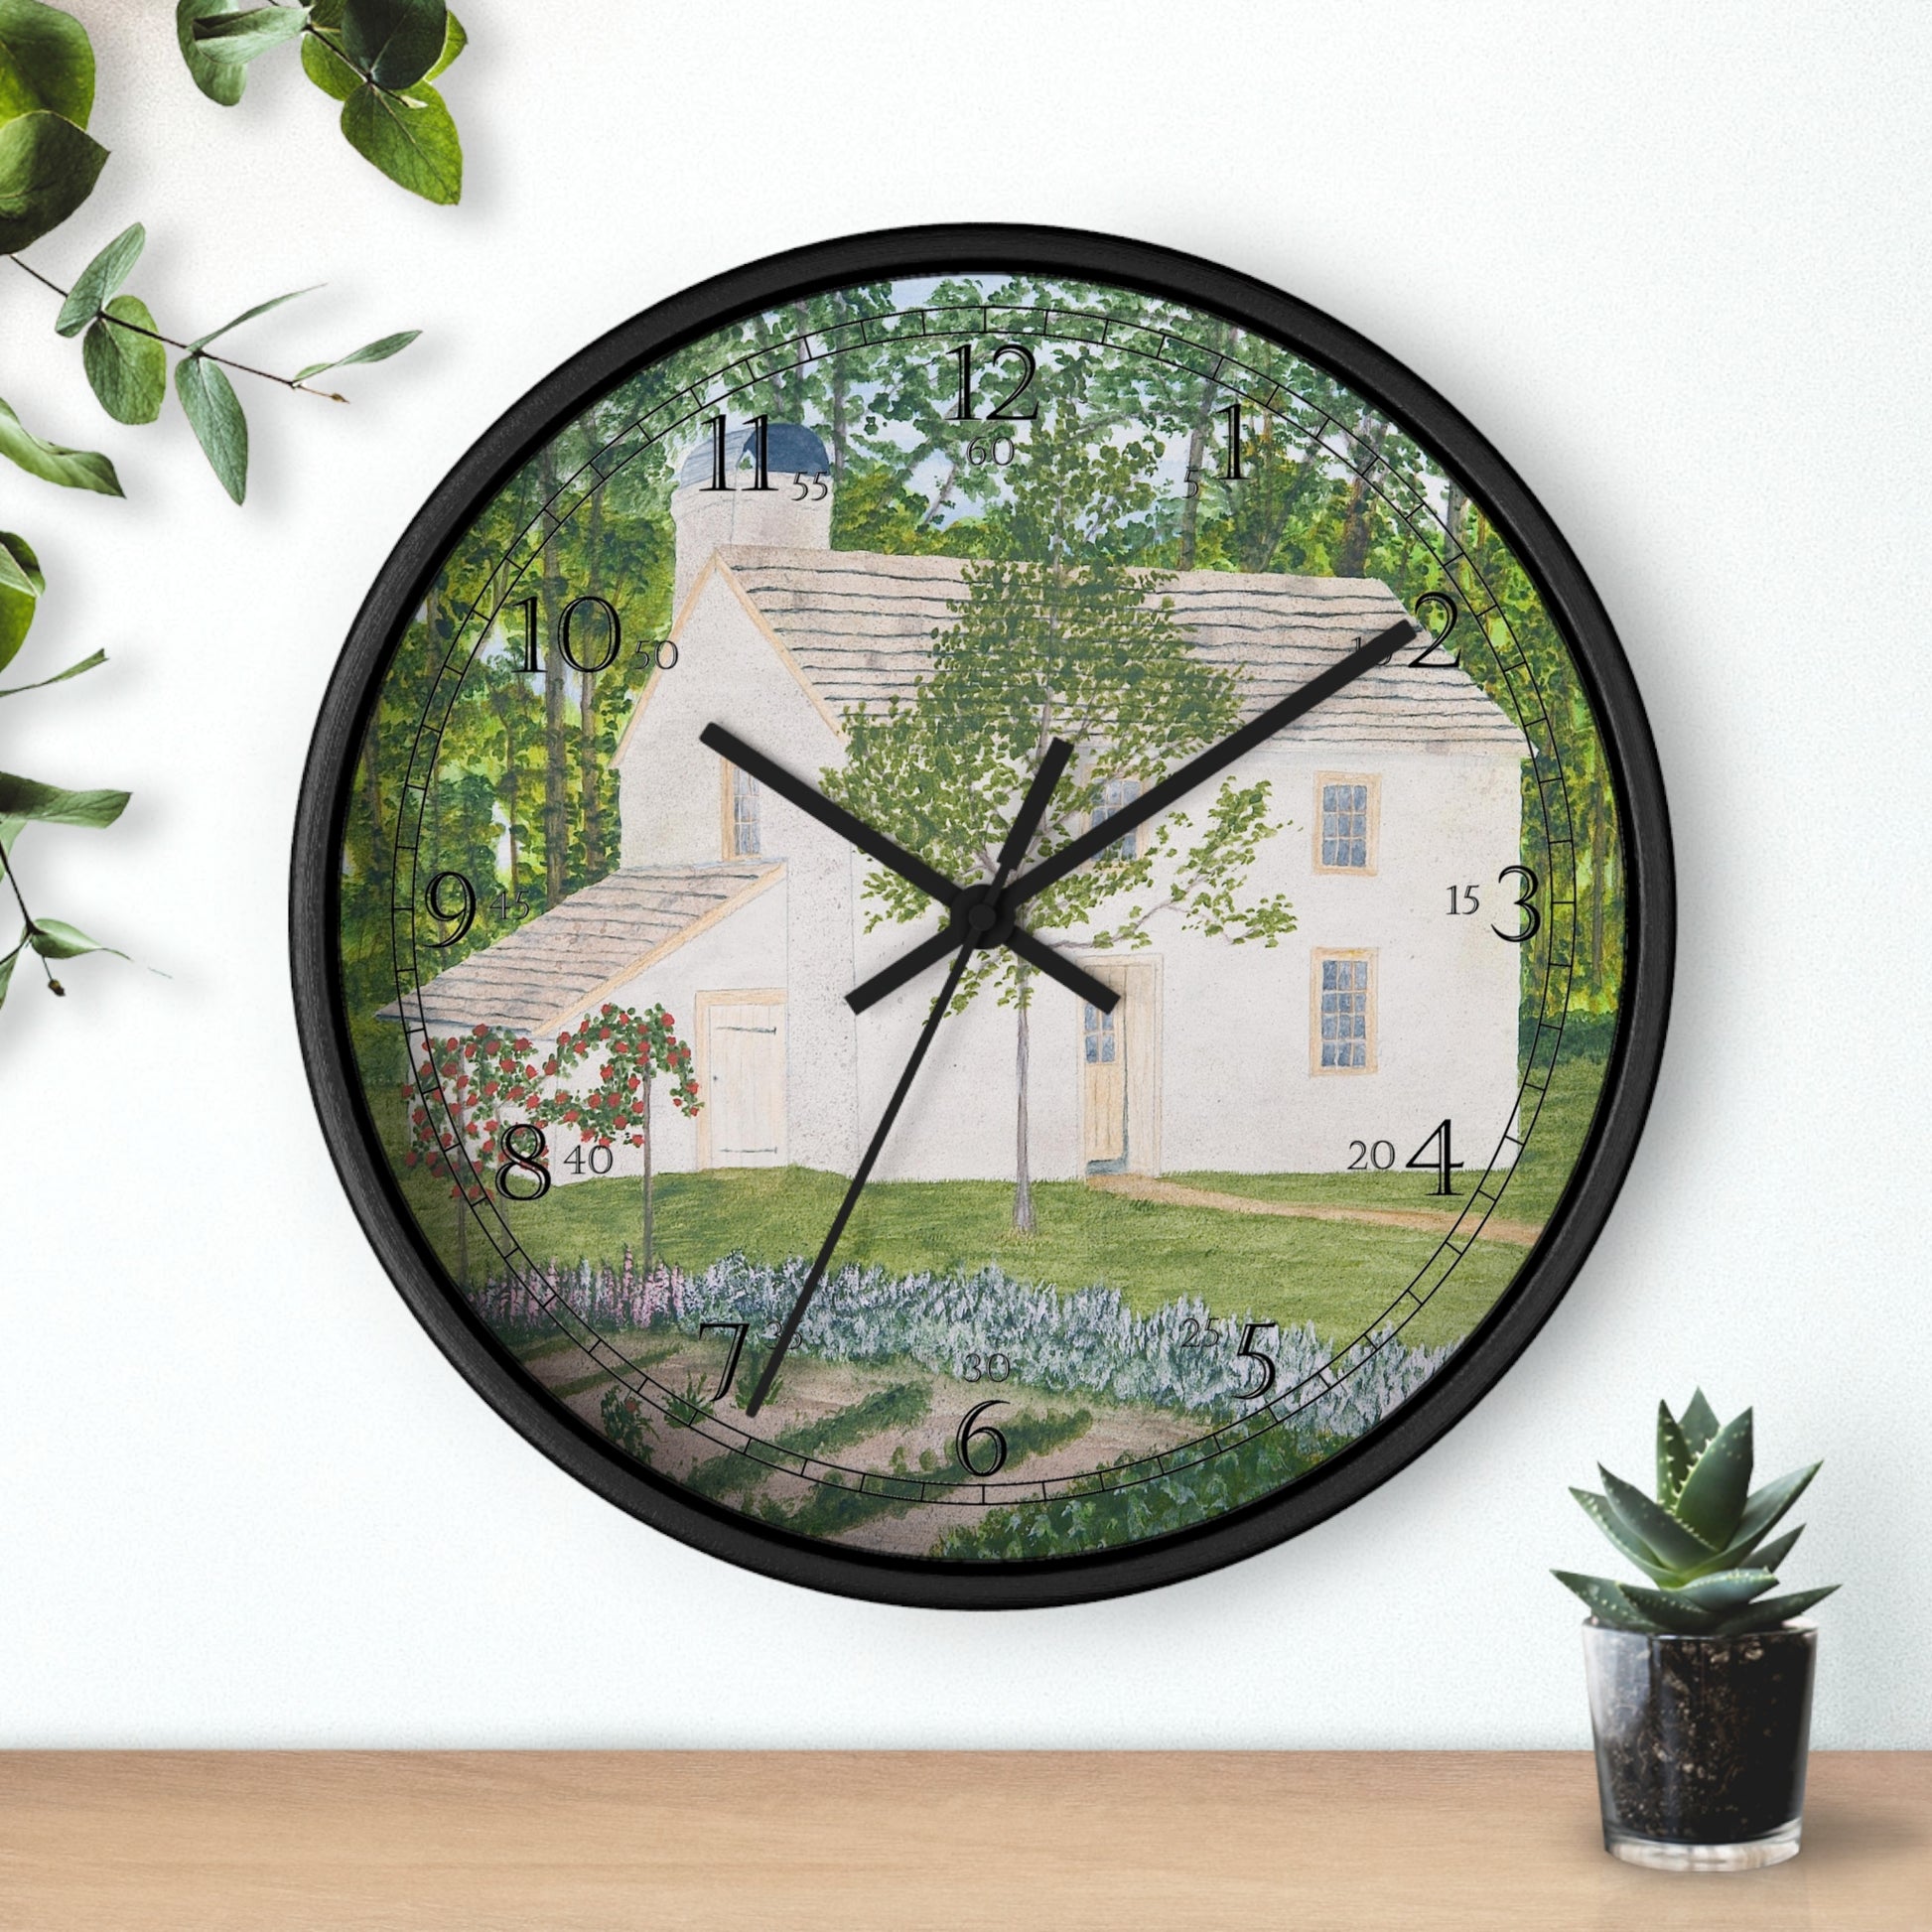 The Country Garden English Numeral Clock features a reproduction of a watercolor painting by artist Lee M. Buchanan. Add a touch of country charm to any room in your home with this lovely clock!